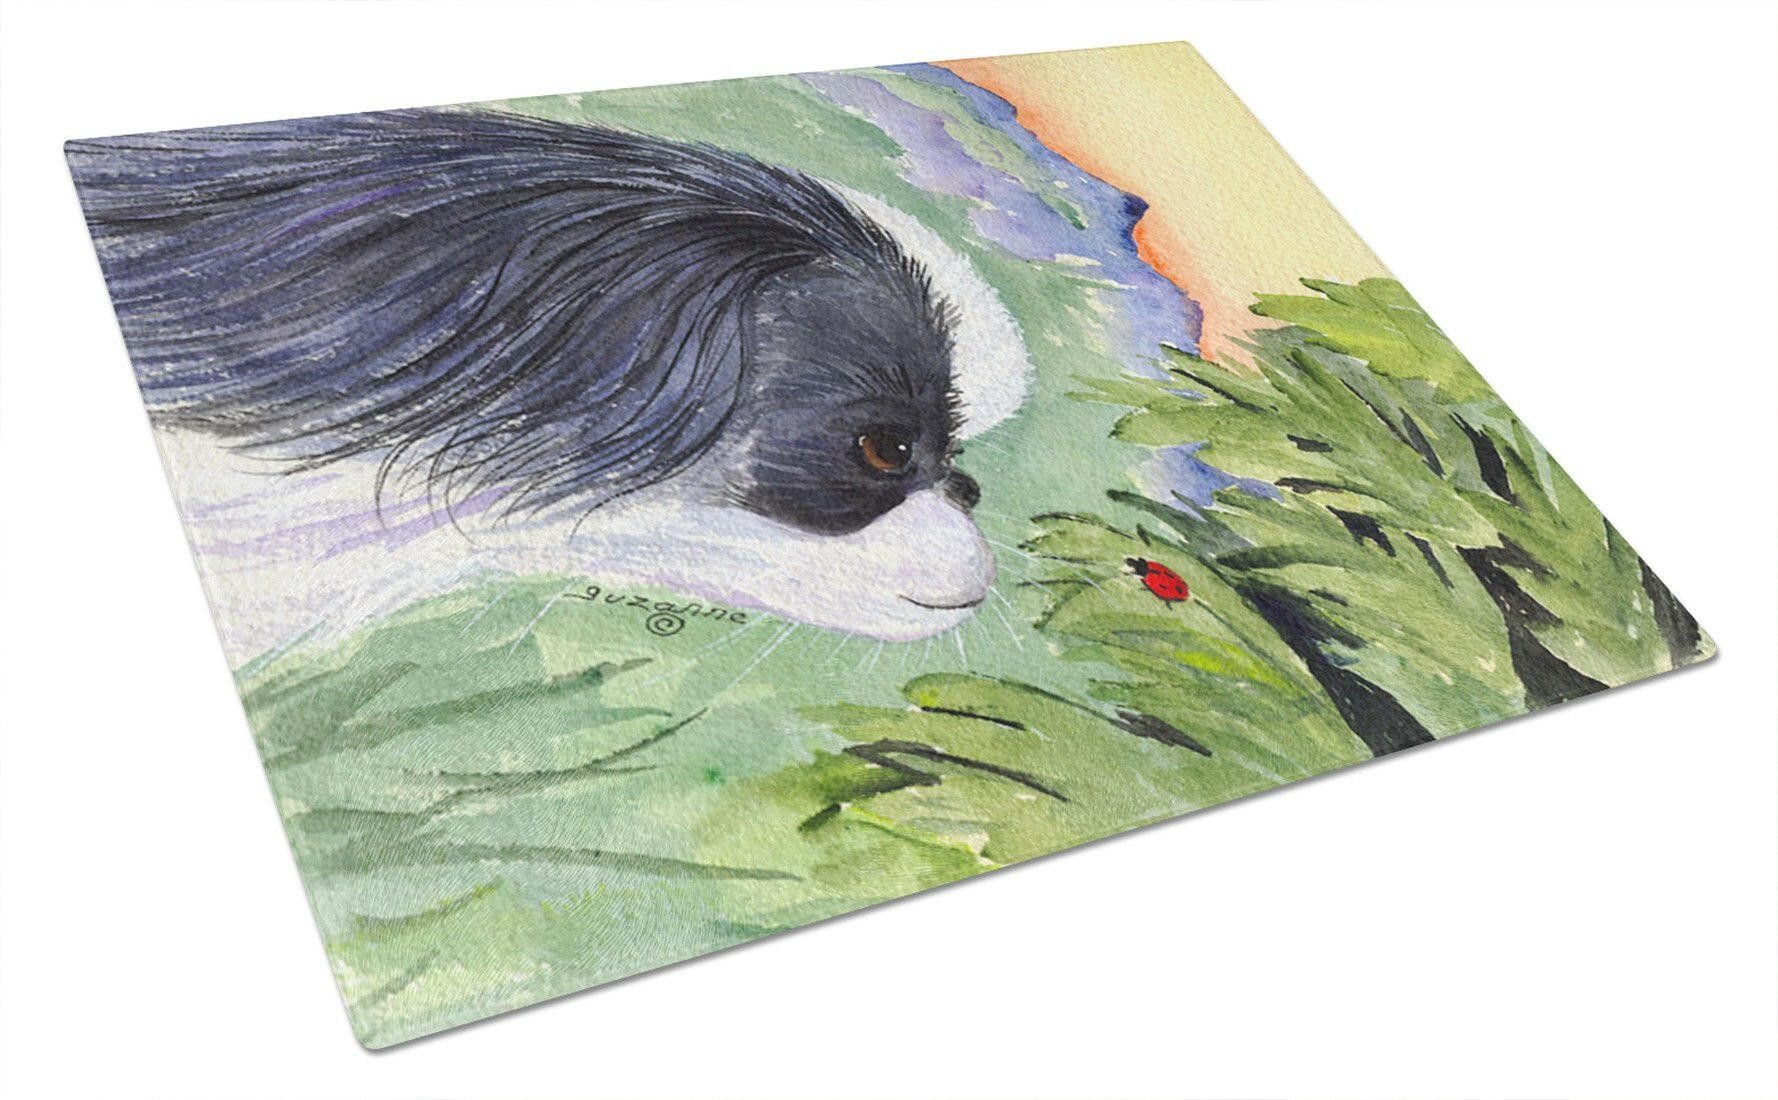 Japanese Chin Glass Cutting Board Large by Caroline's Treasures